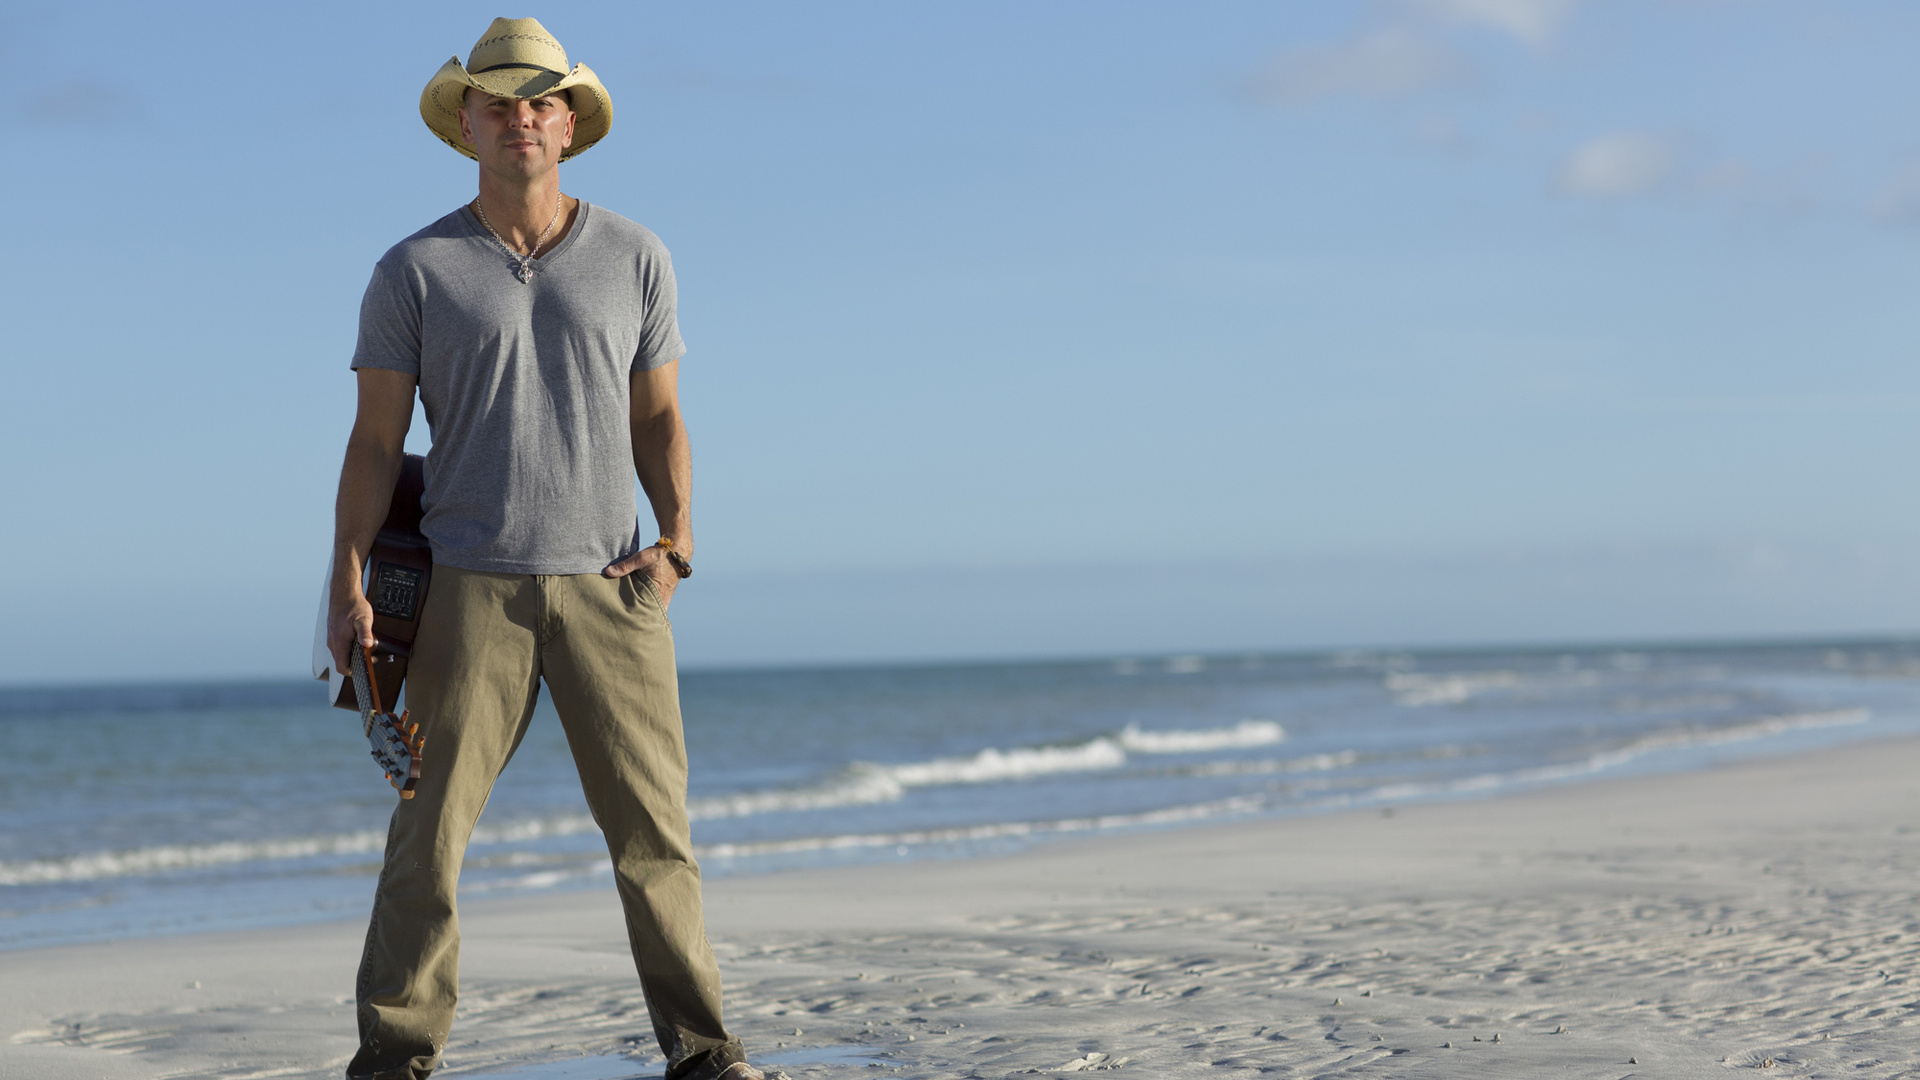 Desktop Wallpaper Kenny Chesney Pirate Flag posted by John Tremblay 1920x1080